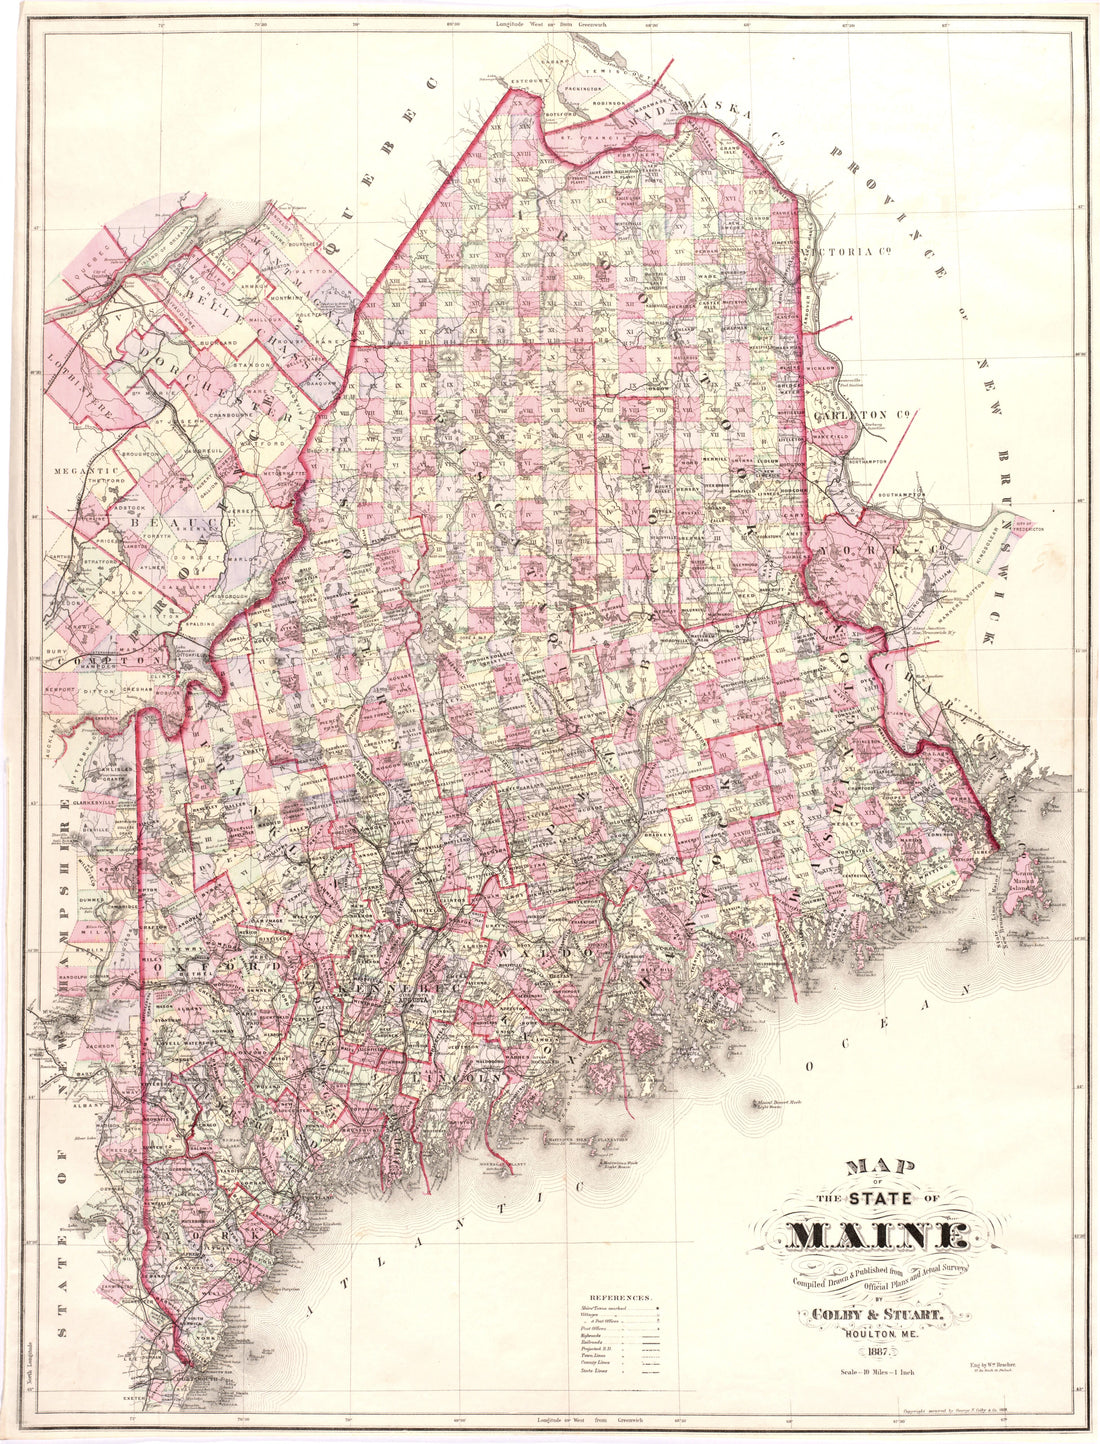 This hand drawn illustration (map) of Map of the State of Maine from Colby&